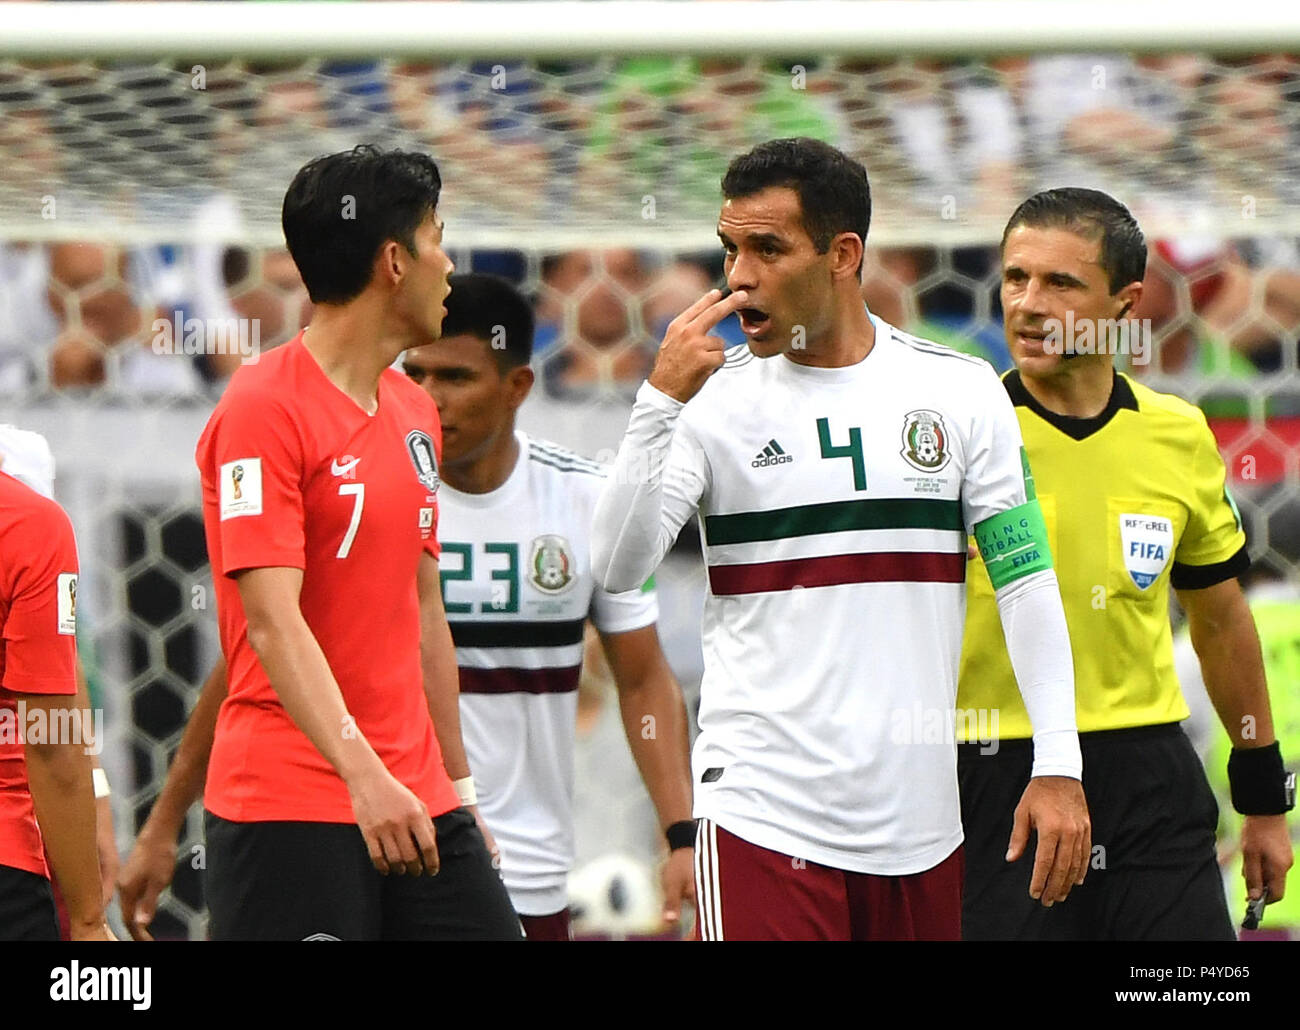 Rostov On Don. 23rd June, 2018. Rafael Marquez (2nd R) of Mexico talks with Son Heungmin of South Korea during the 2018 FIFA World Cup Group F match between South Korea and Mexico in Rostov-on-Don, Russia, June 23, 2018. Credit: Li Ga/Xinhua/Alamy Live News Stock Photo